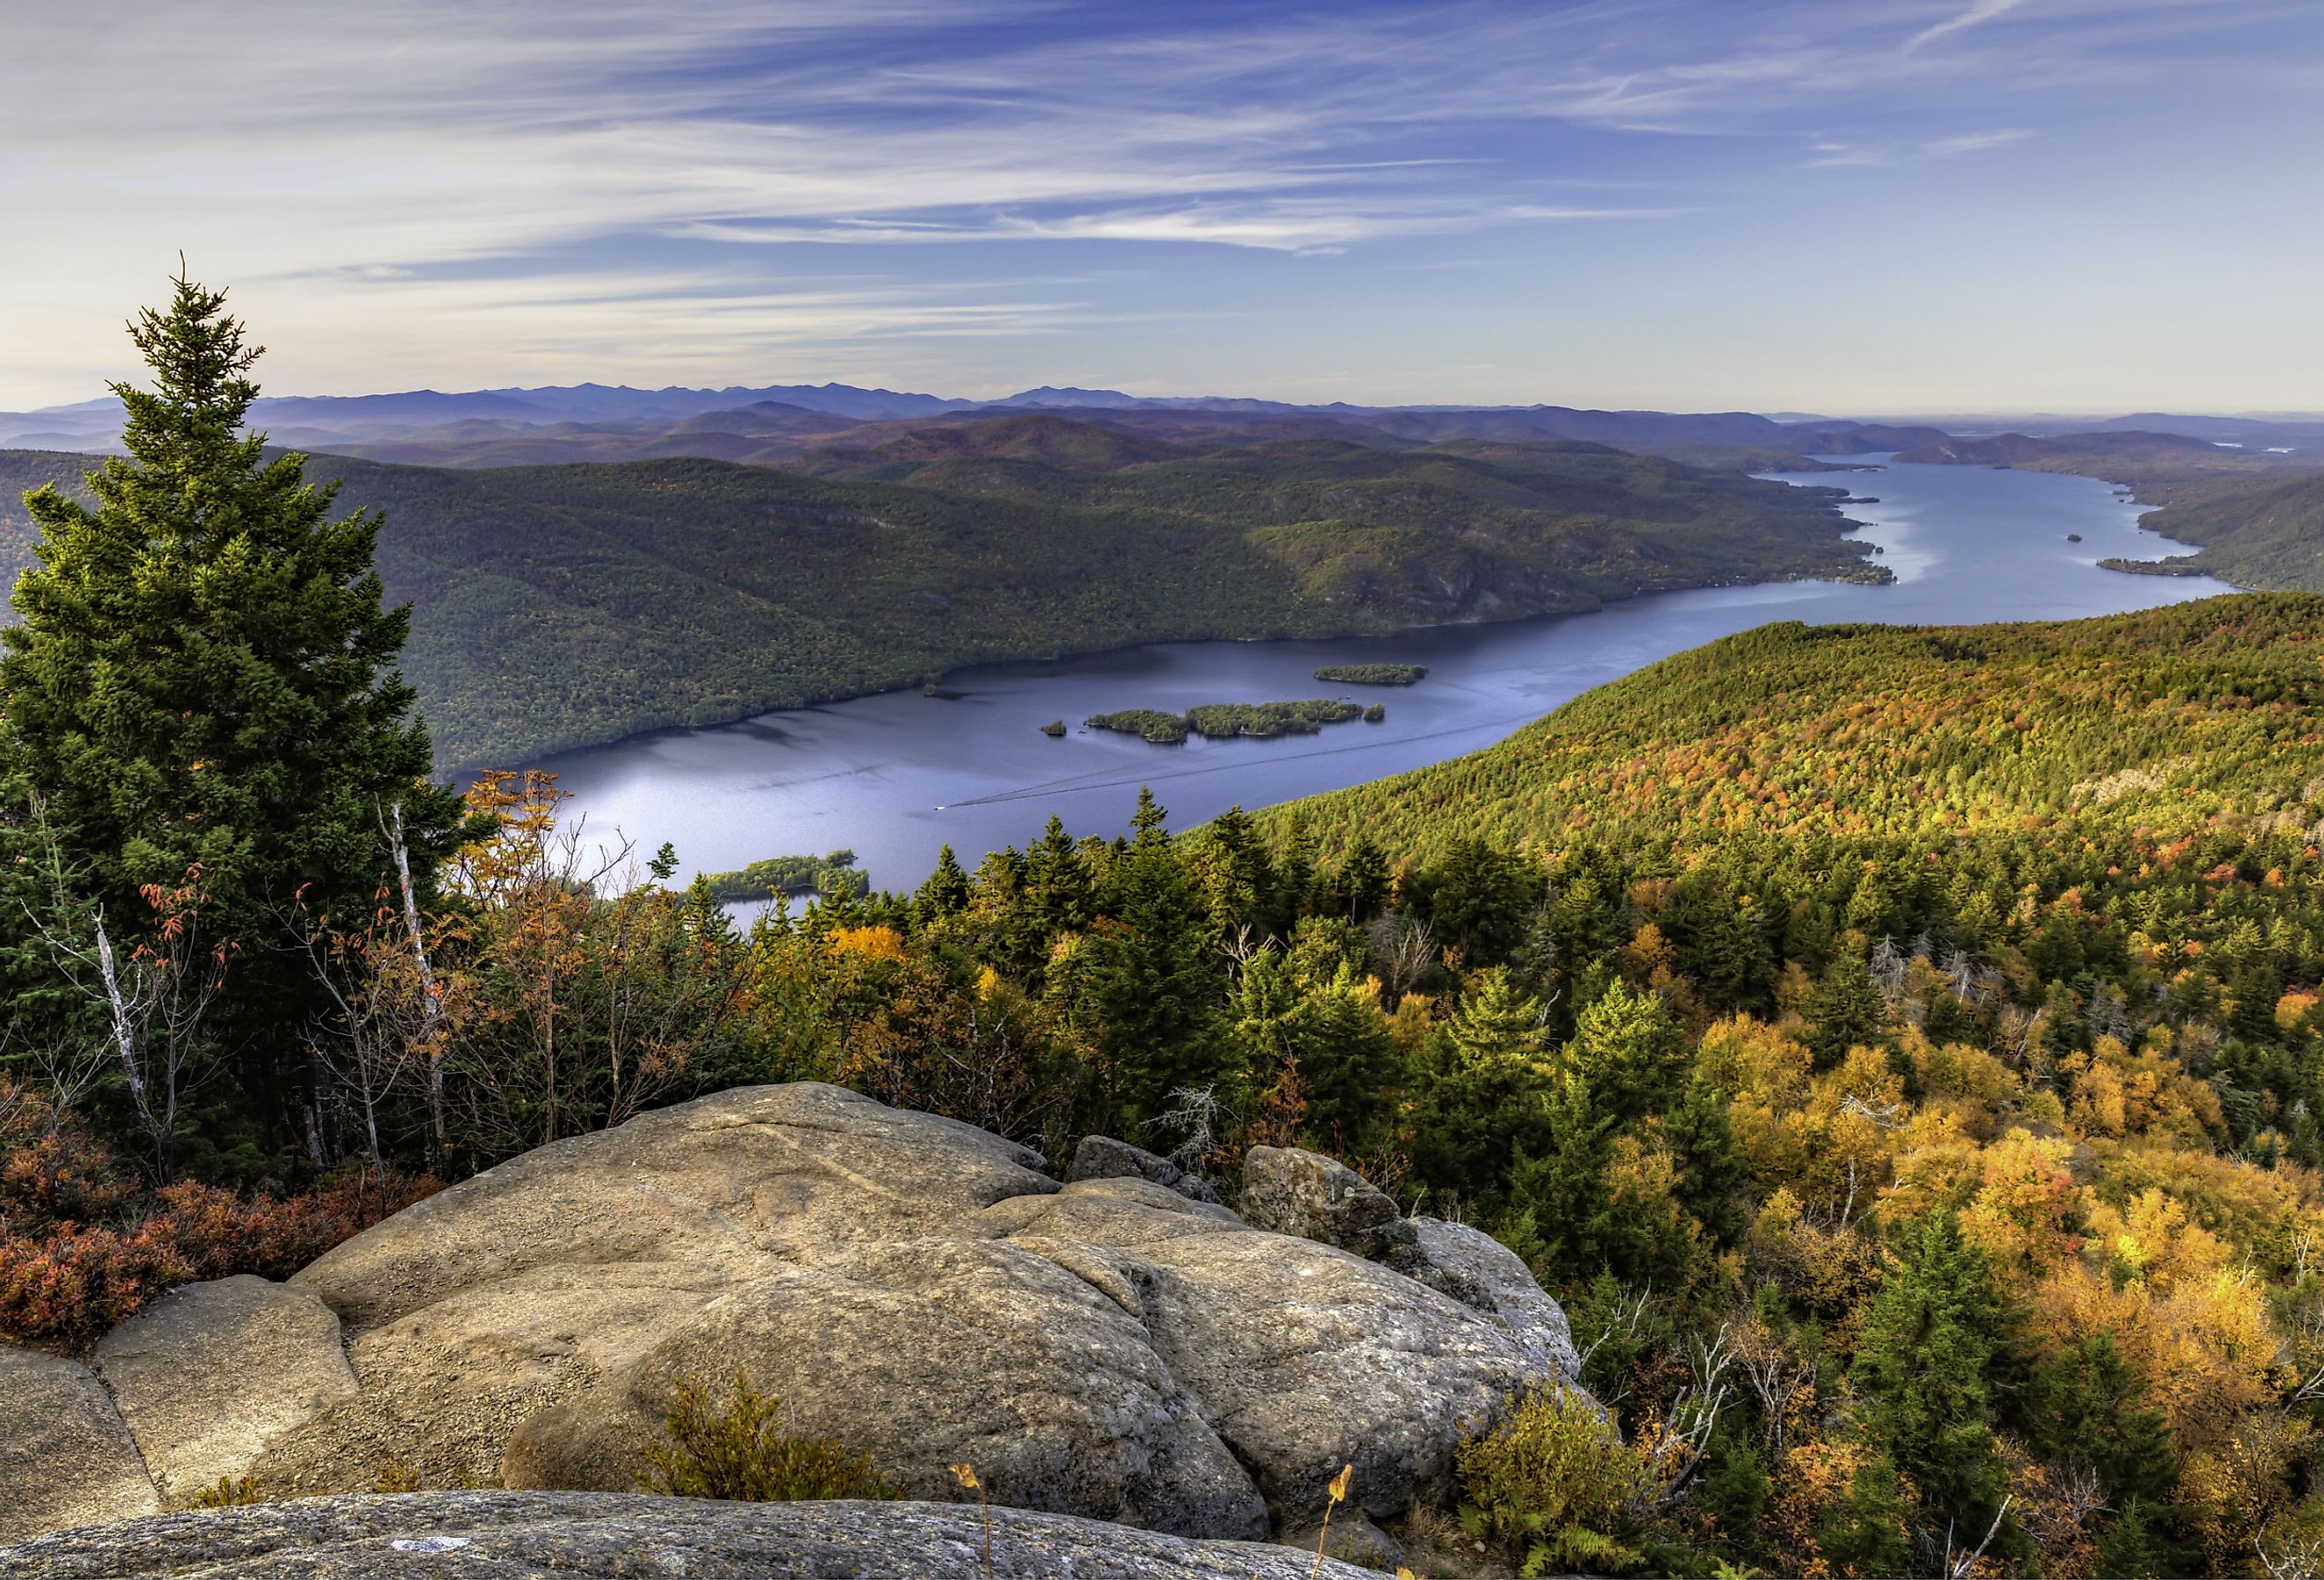 Aerial view of Lake George and the Tongue Mountain Range seen from a lookout on Black Mountain in the Adirondack Mountains of New York.